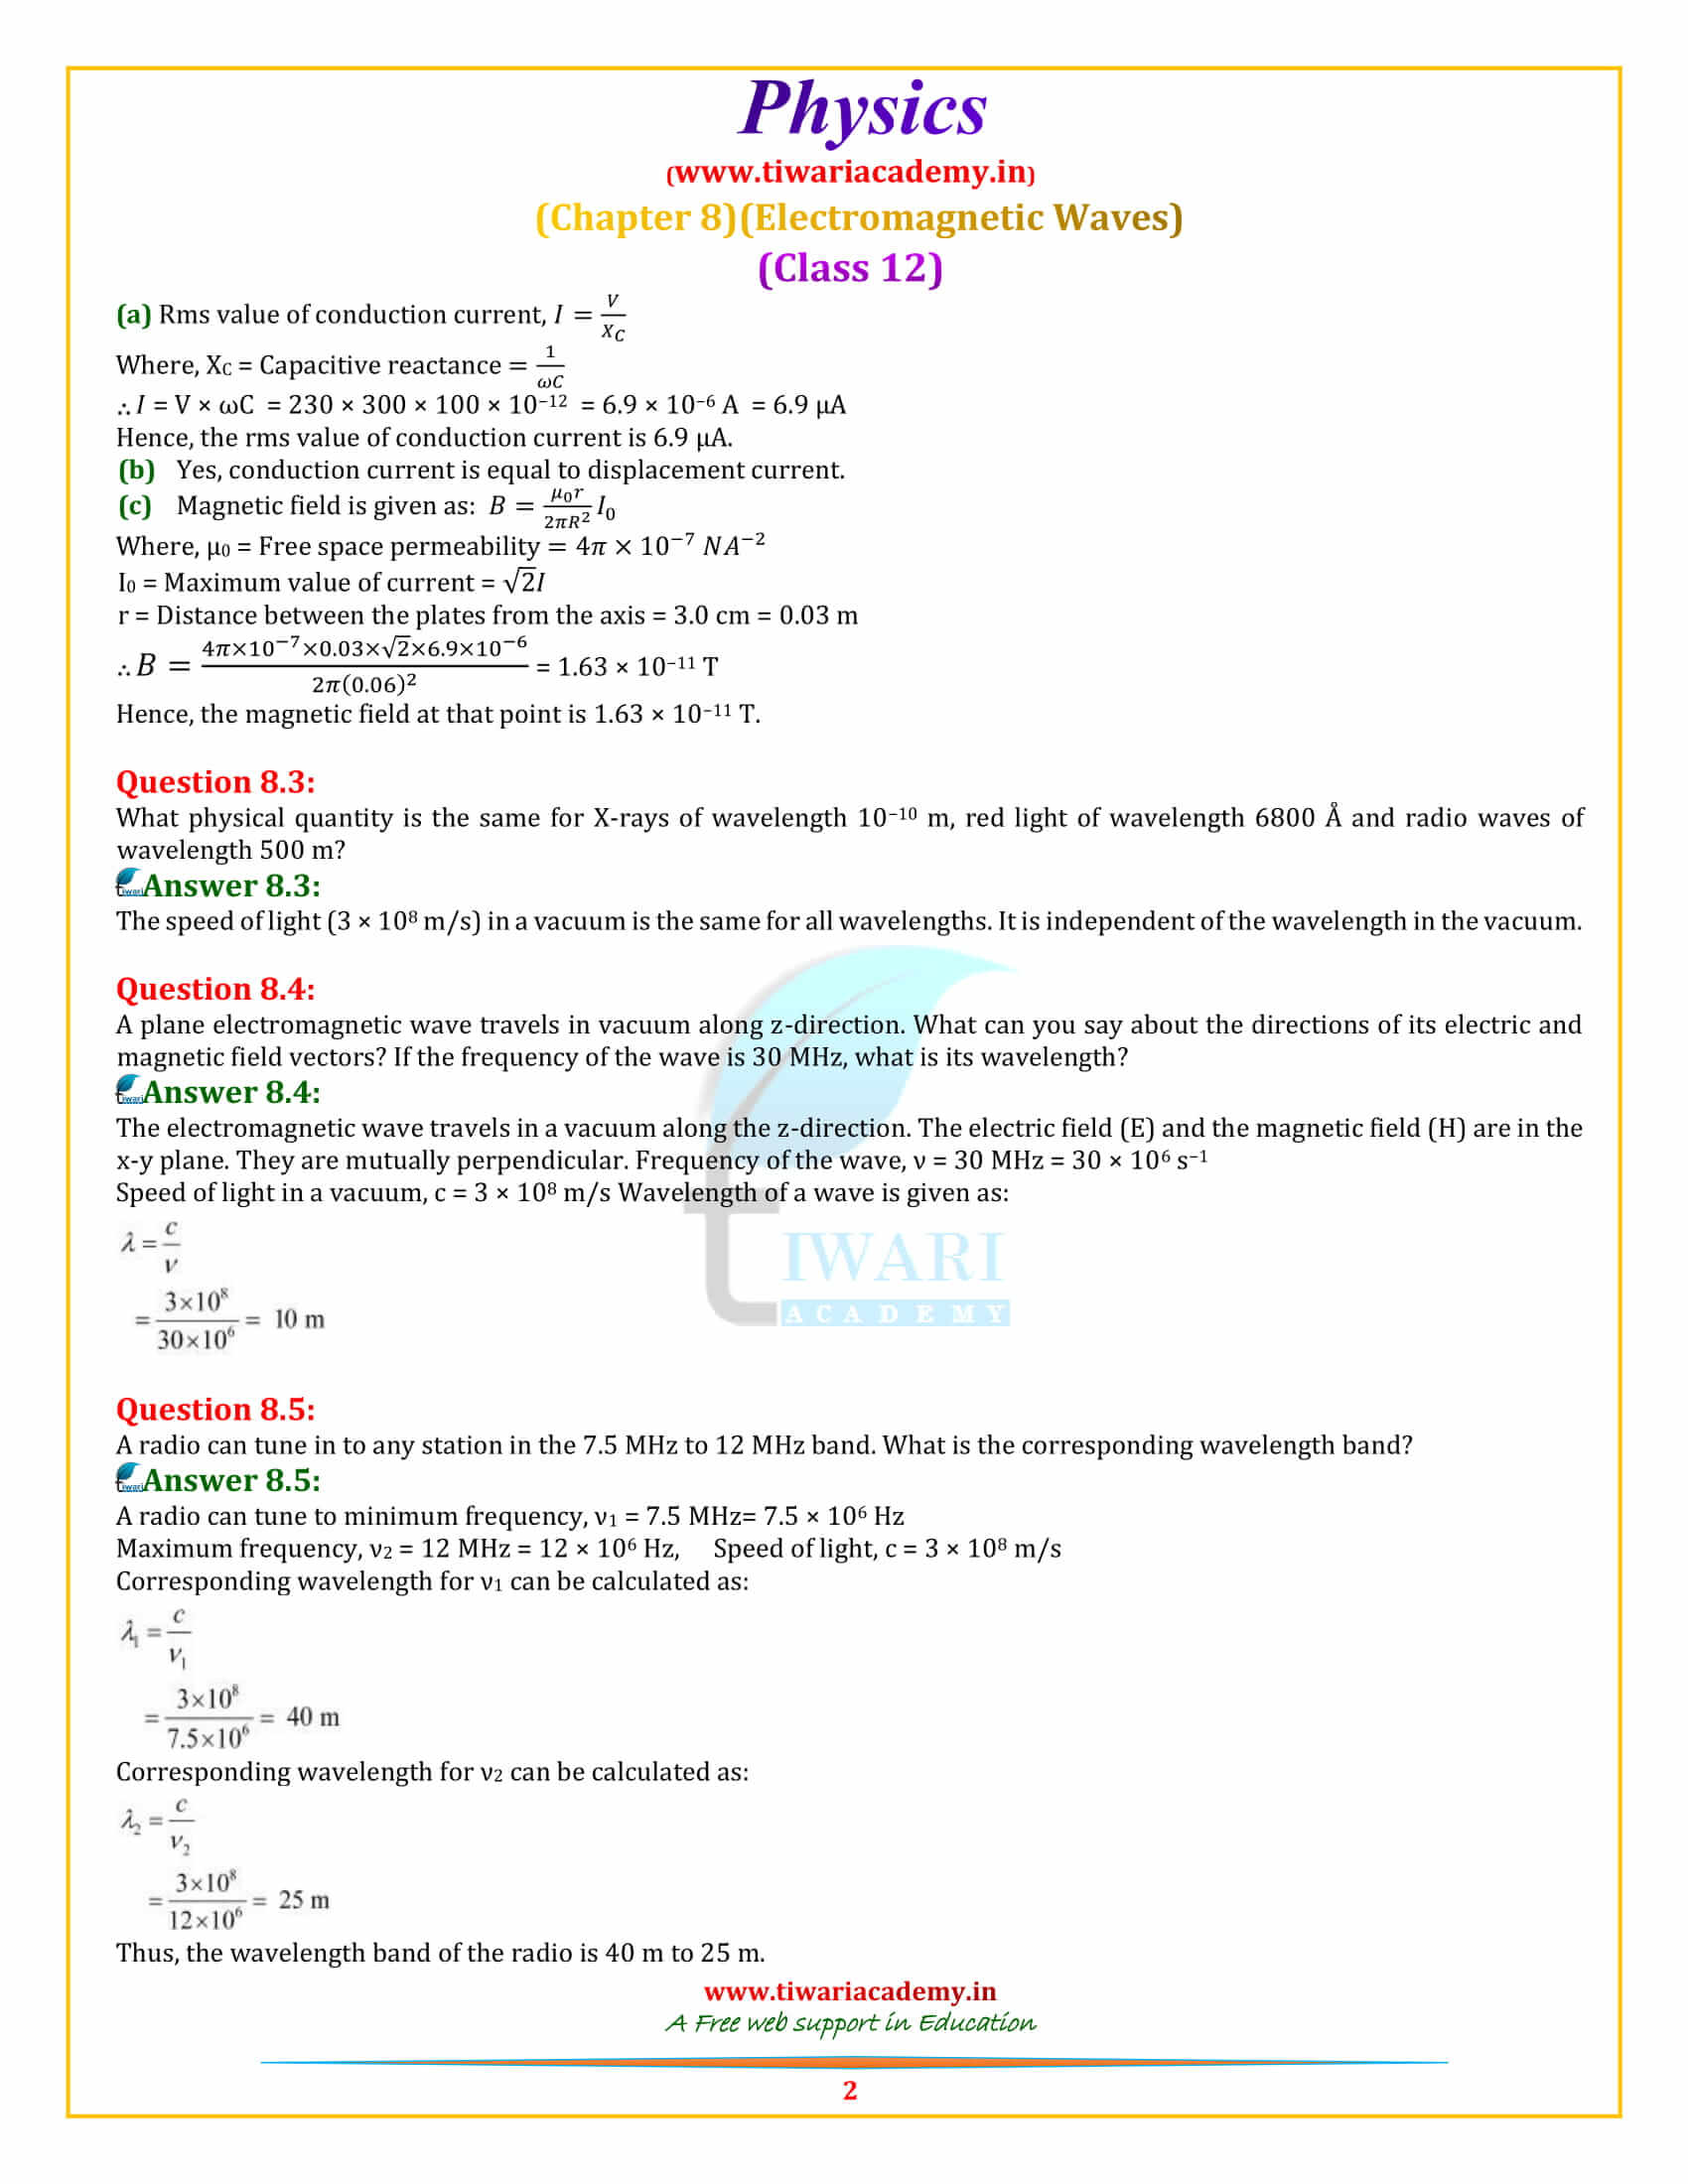 NCERT Solutions for Class 12 Physics Chapter 8 EM Waves in pdf form